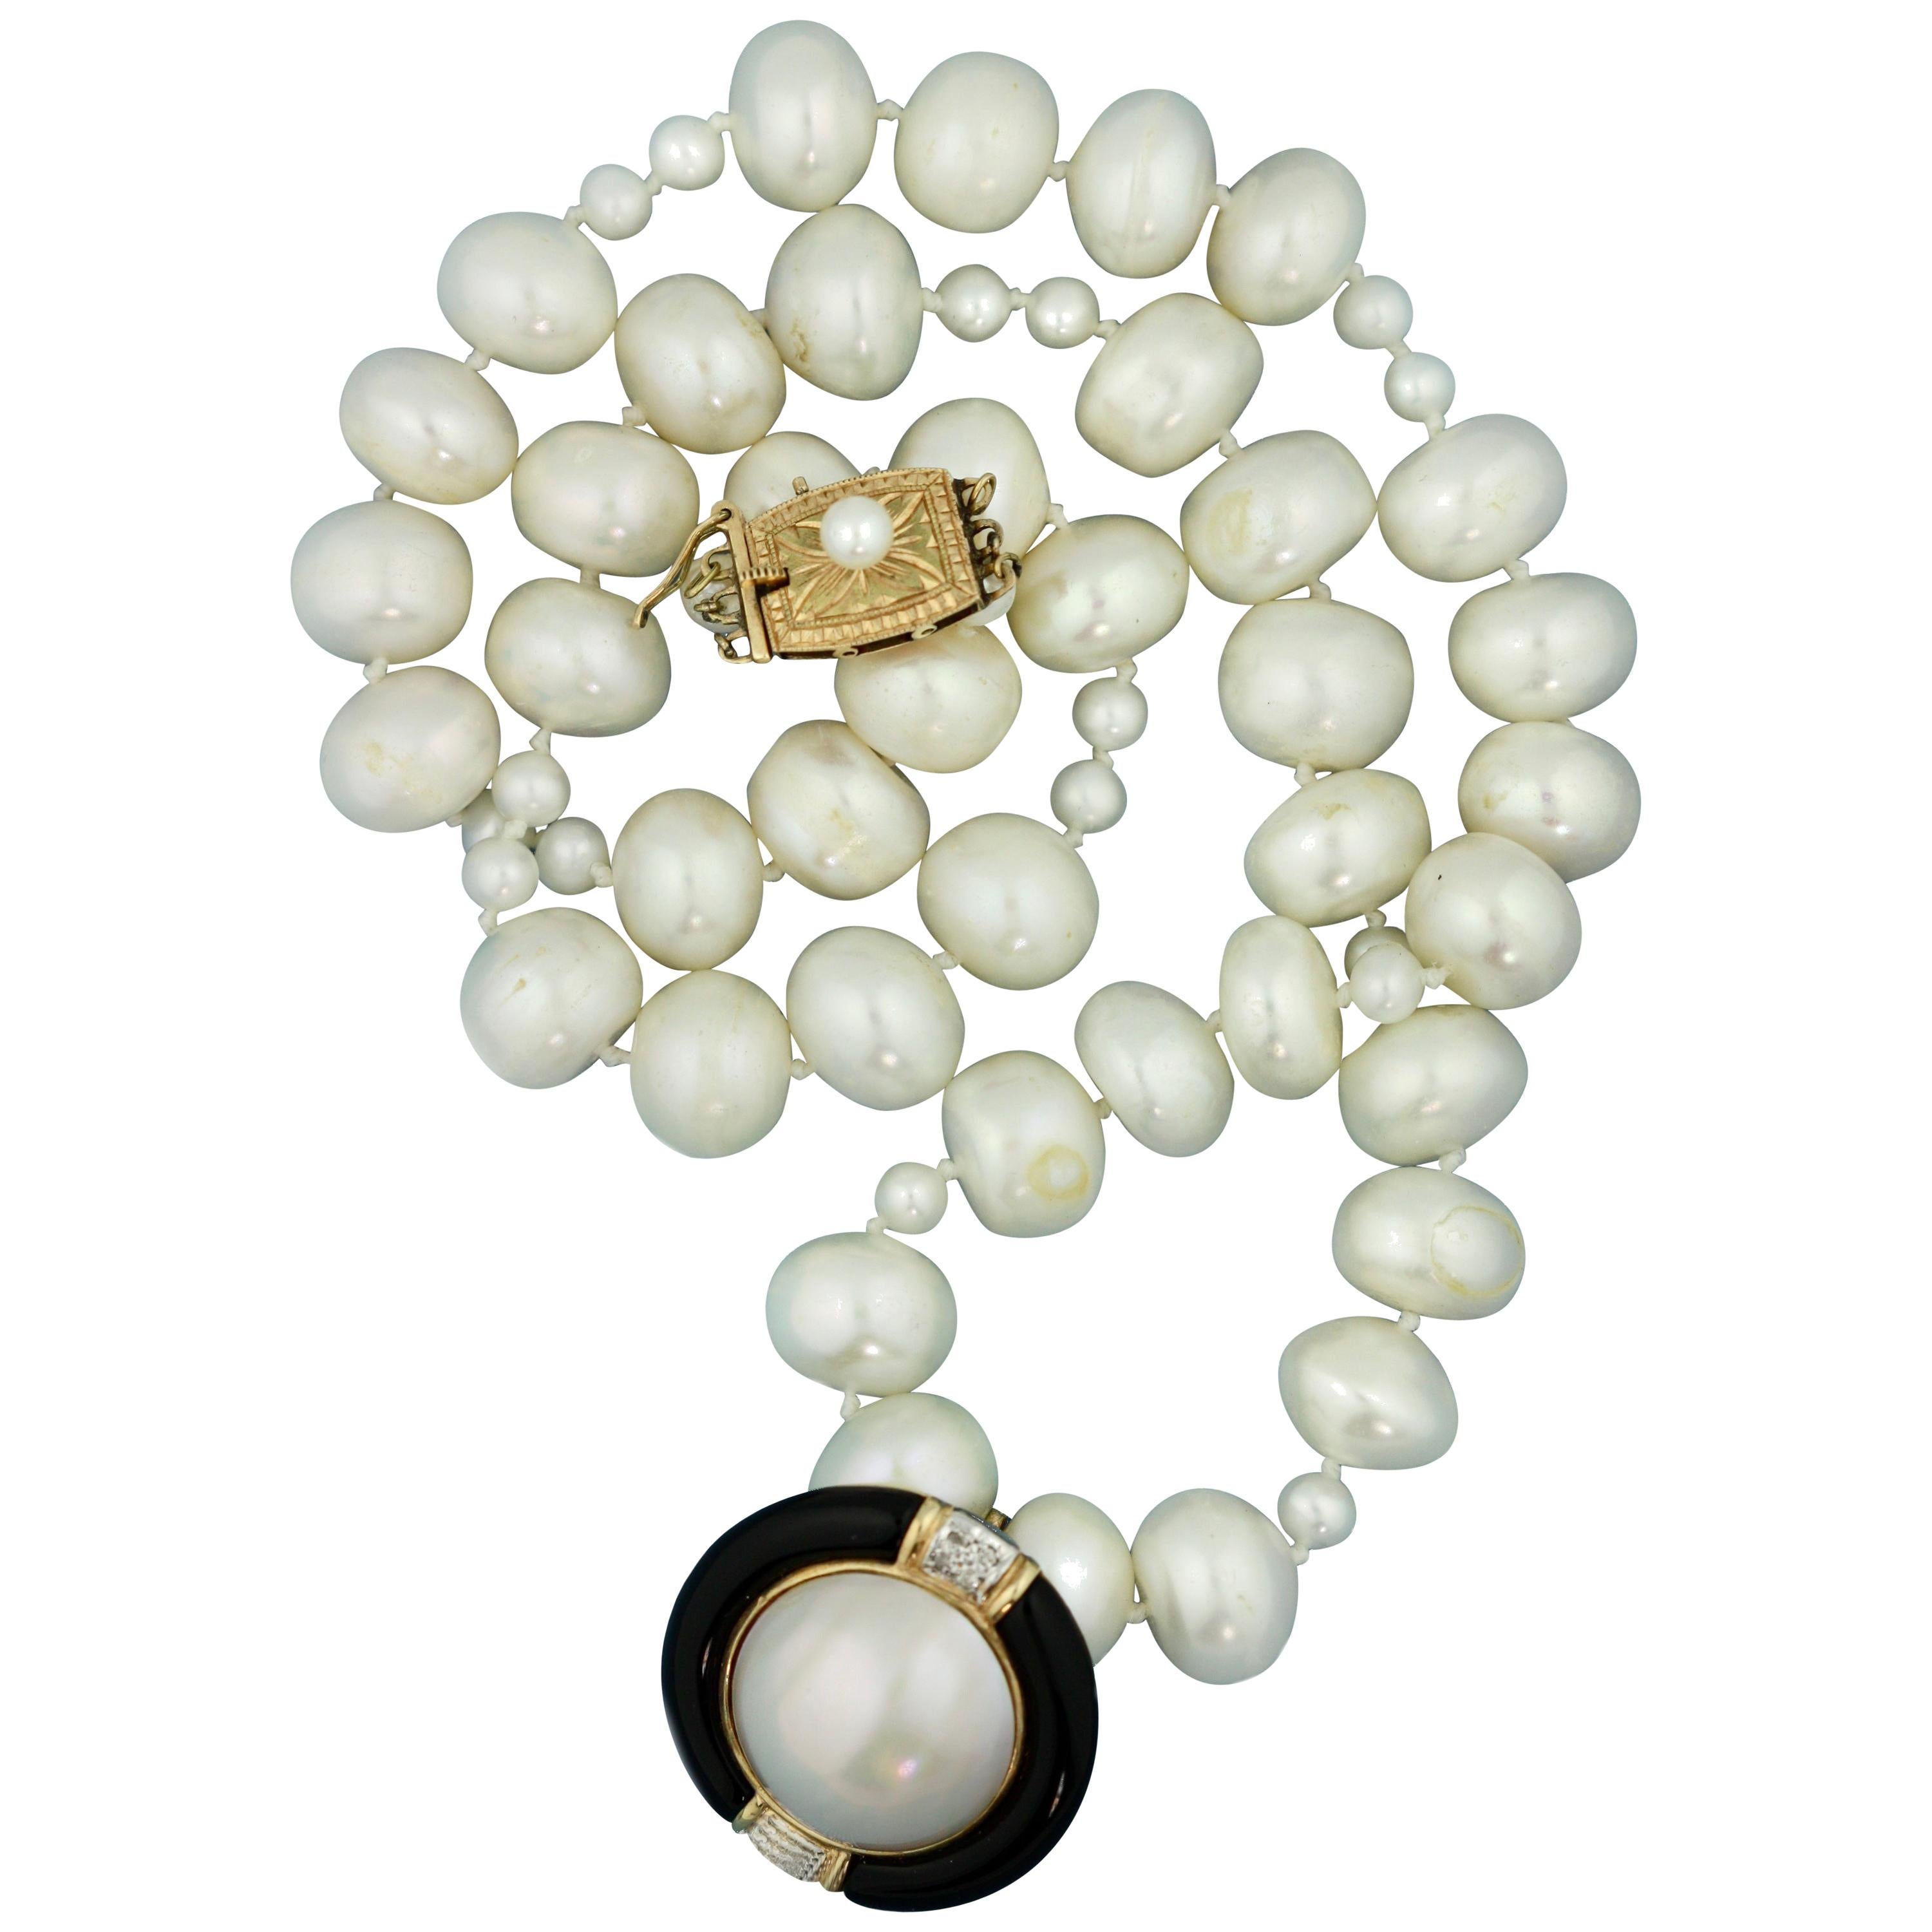 14 Karat Gold, Cultured Pearl, Mabé Pearl, Onyx and Diamond Necklace